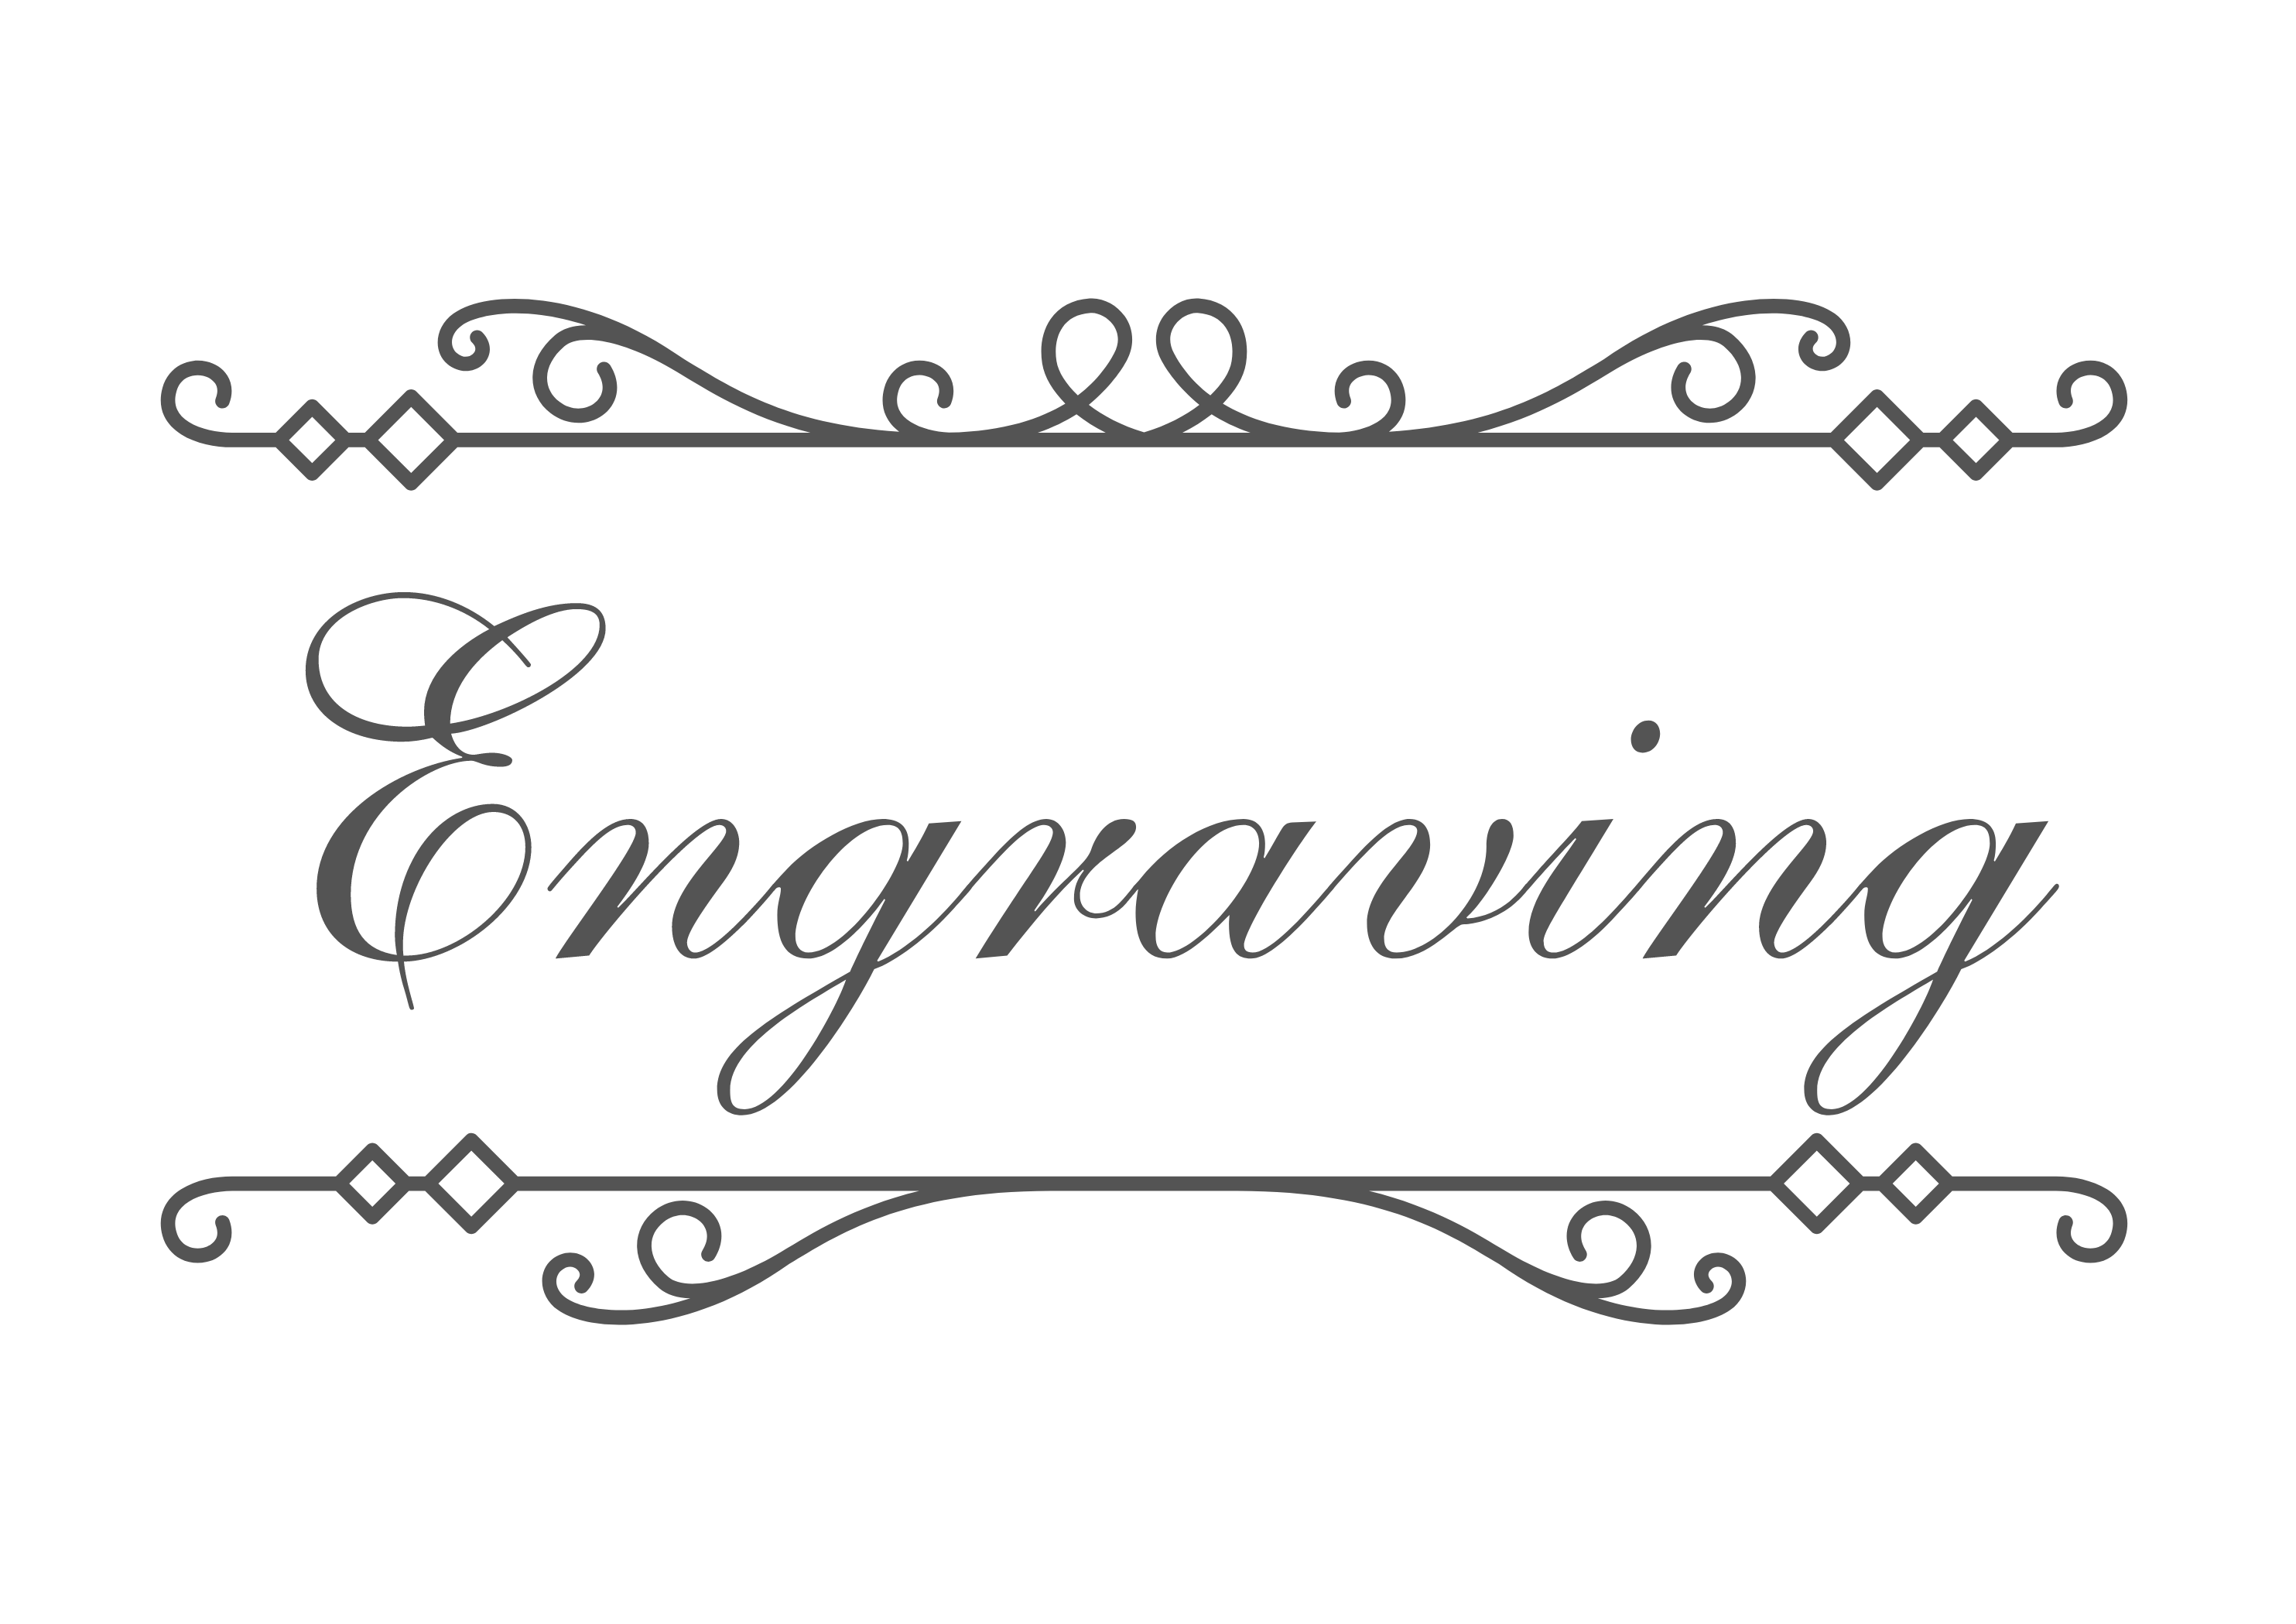 Grey Engraving Icon informing about the Free Engraving 